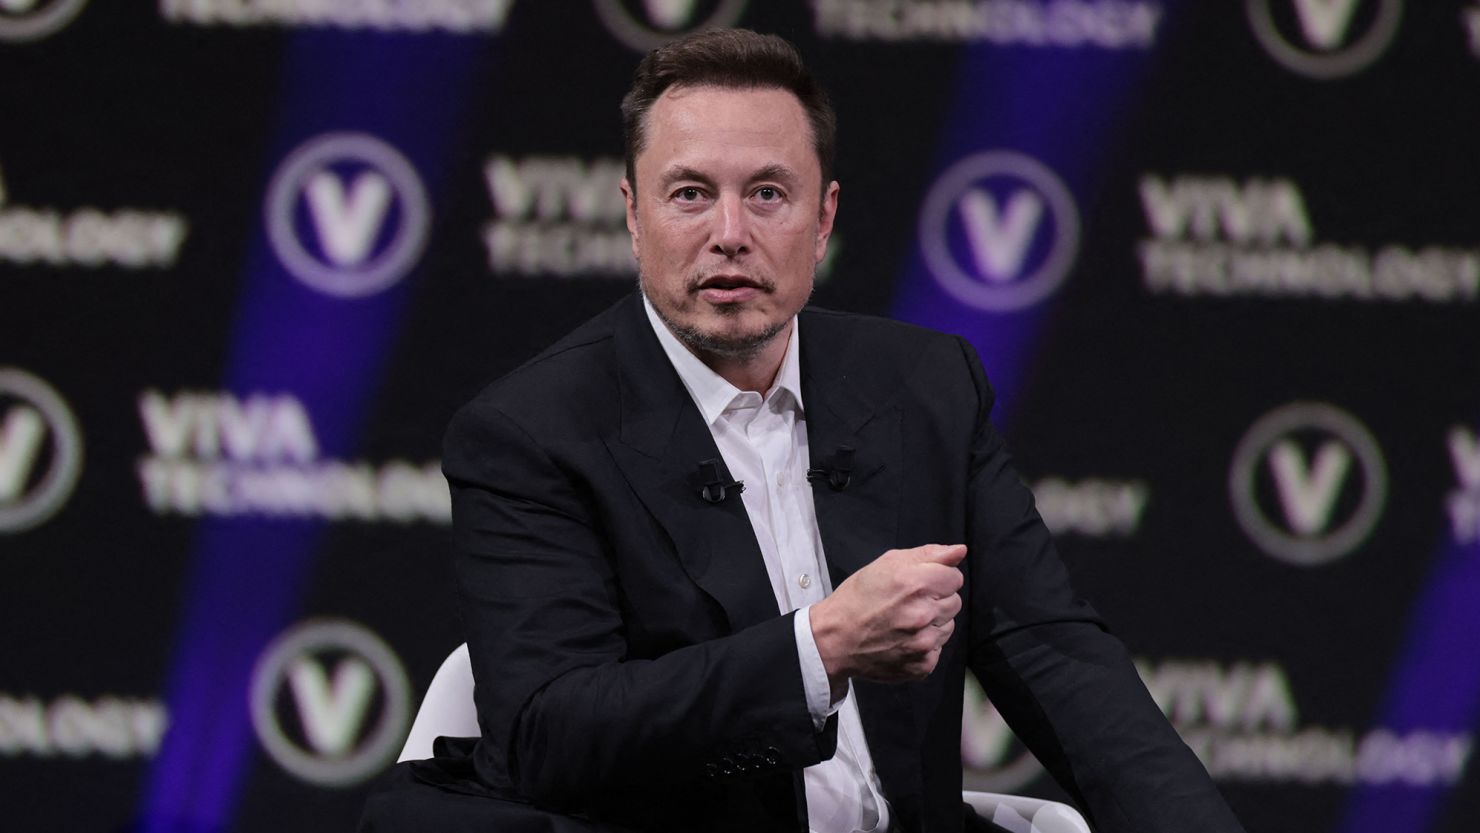 SpaceX, Twitter and electric car maker Tesla CEO Elon Musk reacts as he visits the Vivatech technology startups and innovation fair at the Porte de Versailles exhibition center in Paris, on June 16, 2023. (Photo by Joël SAGET / AFP) (Photo by JOEL SAGET/AFP via Getty Images)